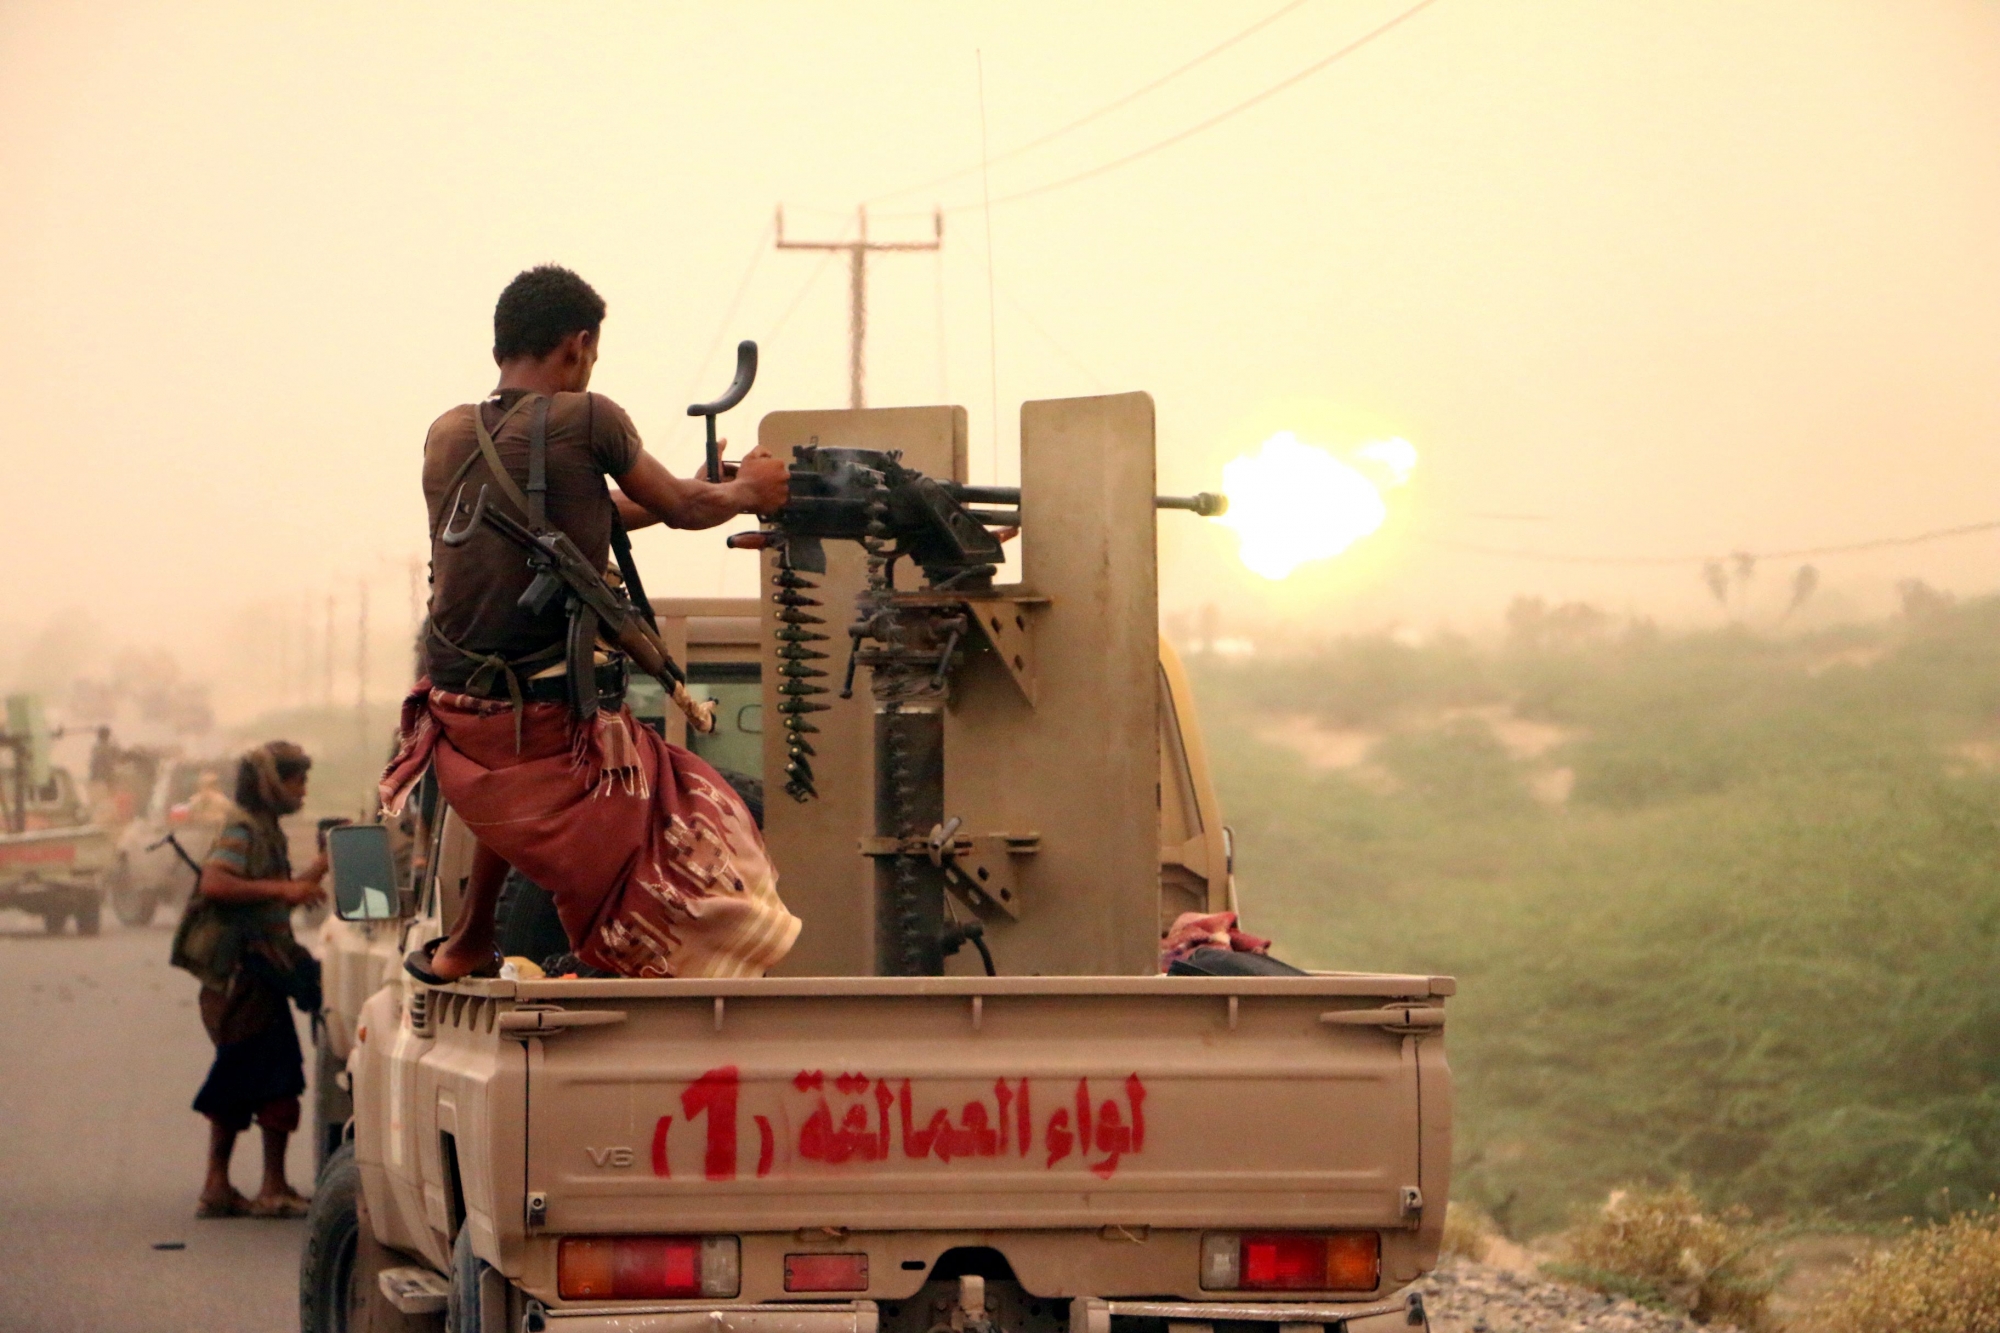 epa06808617 A member of Yemeni government forces fires a heavy machine gun during an offensive against Houthi positions on the outskirts of the western port city of Hodeidah, Yemen, 14 June 2018. According to reports, Yemeni government forces backed by the Saudi-led coalition continued to attack Houthi positions in Hodeidah, in an attempt to gain control of the Houthis-held Red Sea port city, which is the main entry for food into the Arab country.  EPA/NAJEEB ALMAHBOOBI YEMEN CONFLICT HODEIDAH